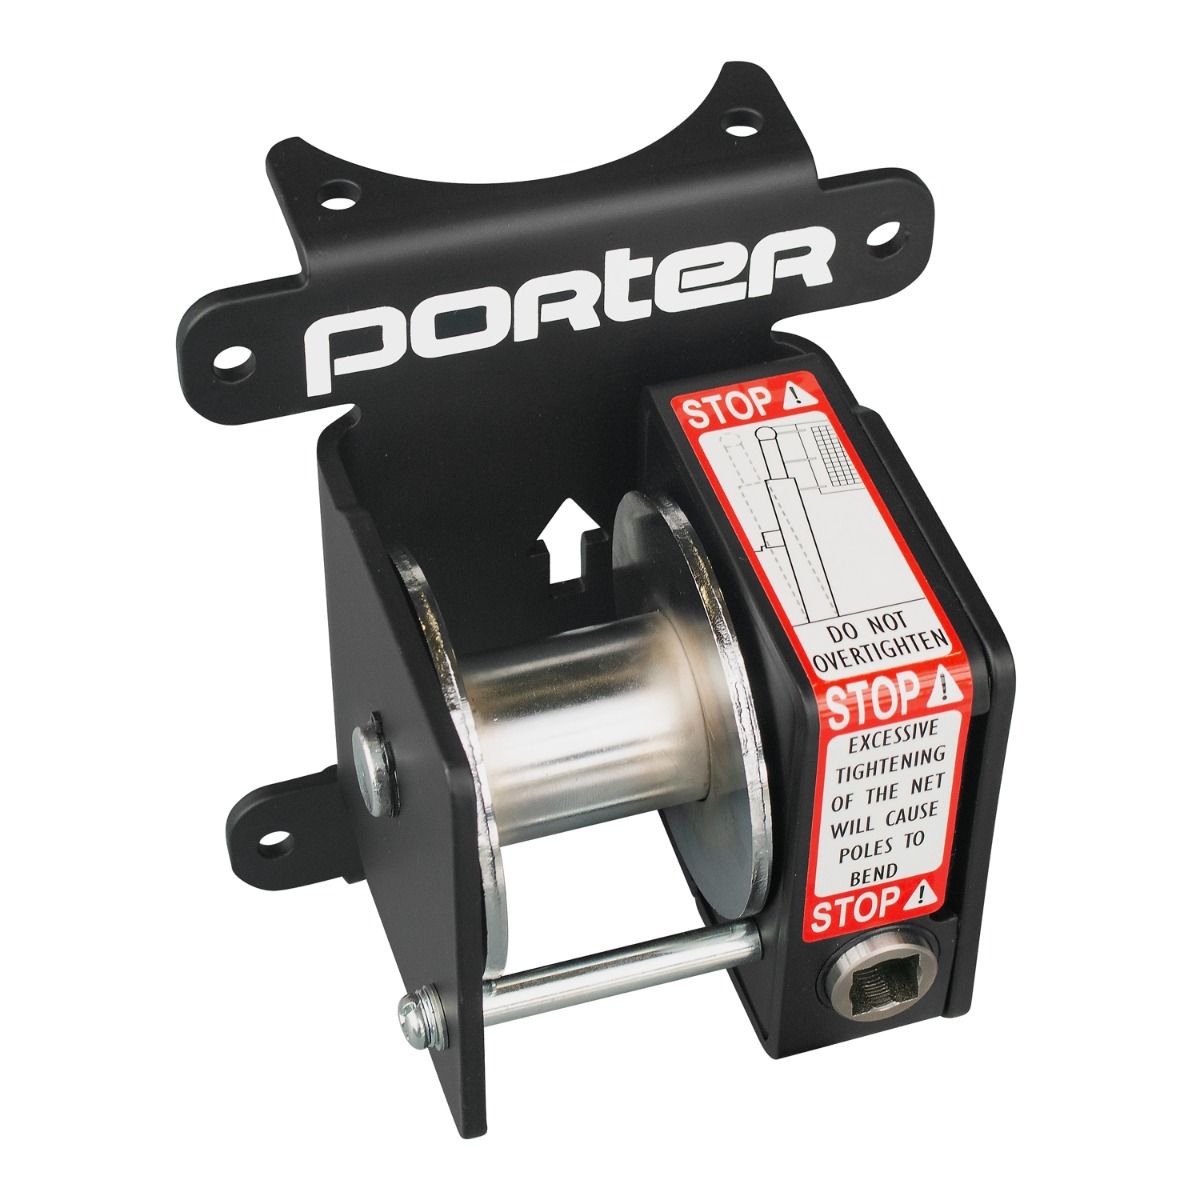 Gill Athletics Powr-Select Volleyball Winch